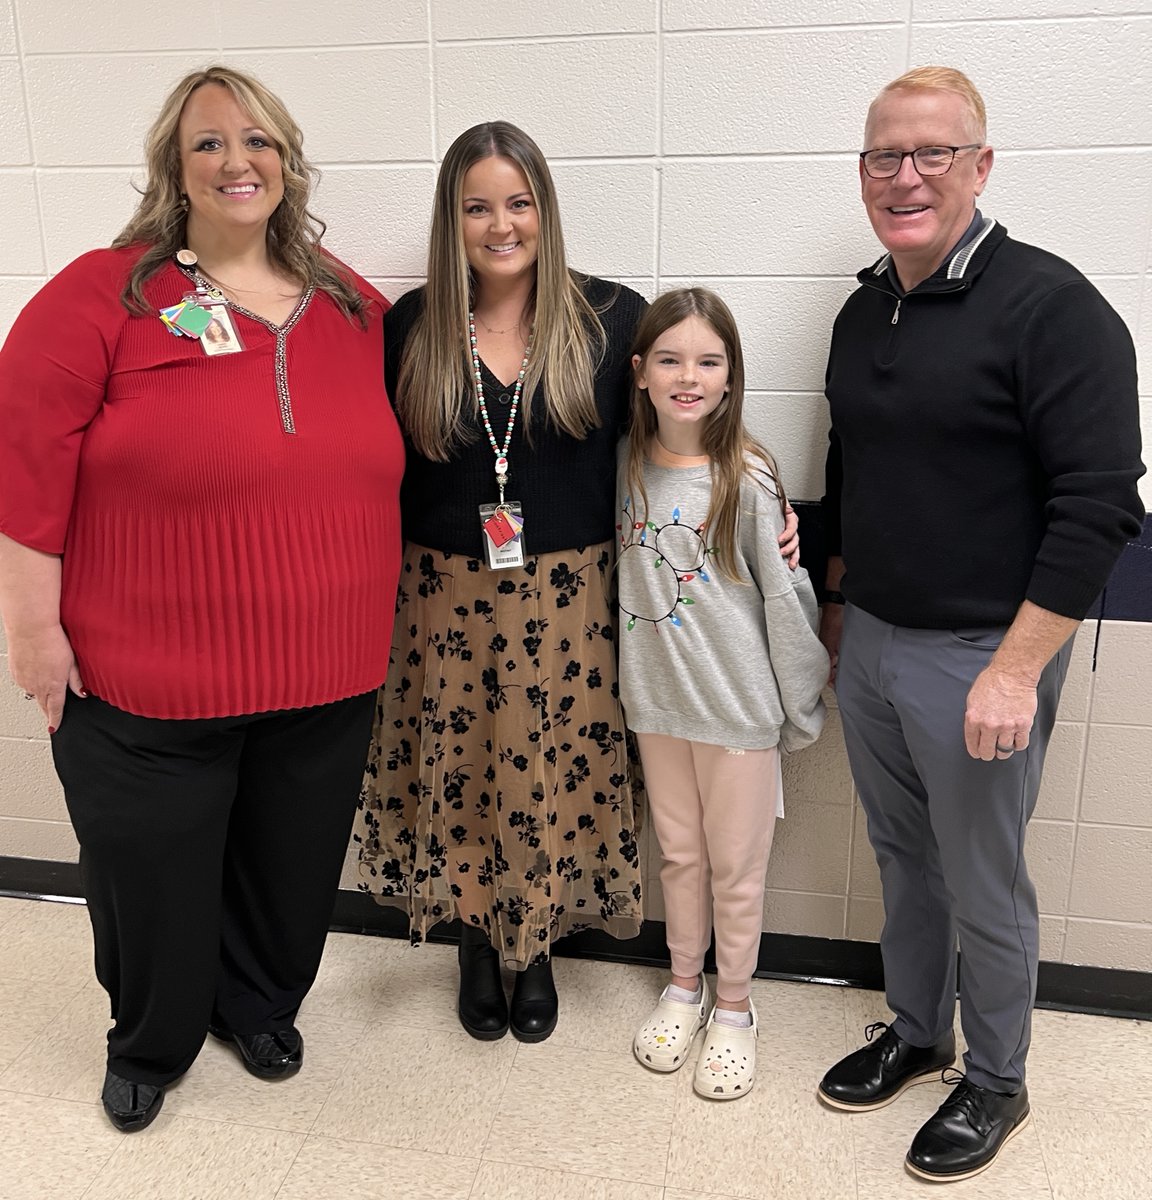 As part of #thanksCCSD, one honoree is randomly selected monthly to receive a gift bag & $25 Visa card from Credit Union of Georgia. The November winner was Johnston Elementary School teacher Channing Roberts, who was thanked by Abigail Piper. #thanksCCSD #CCSDfam